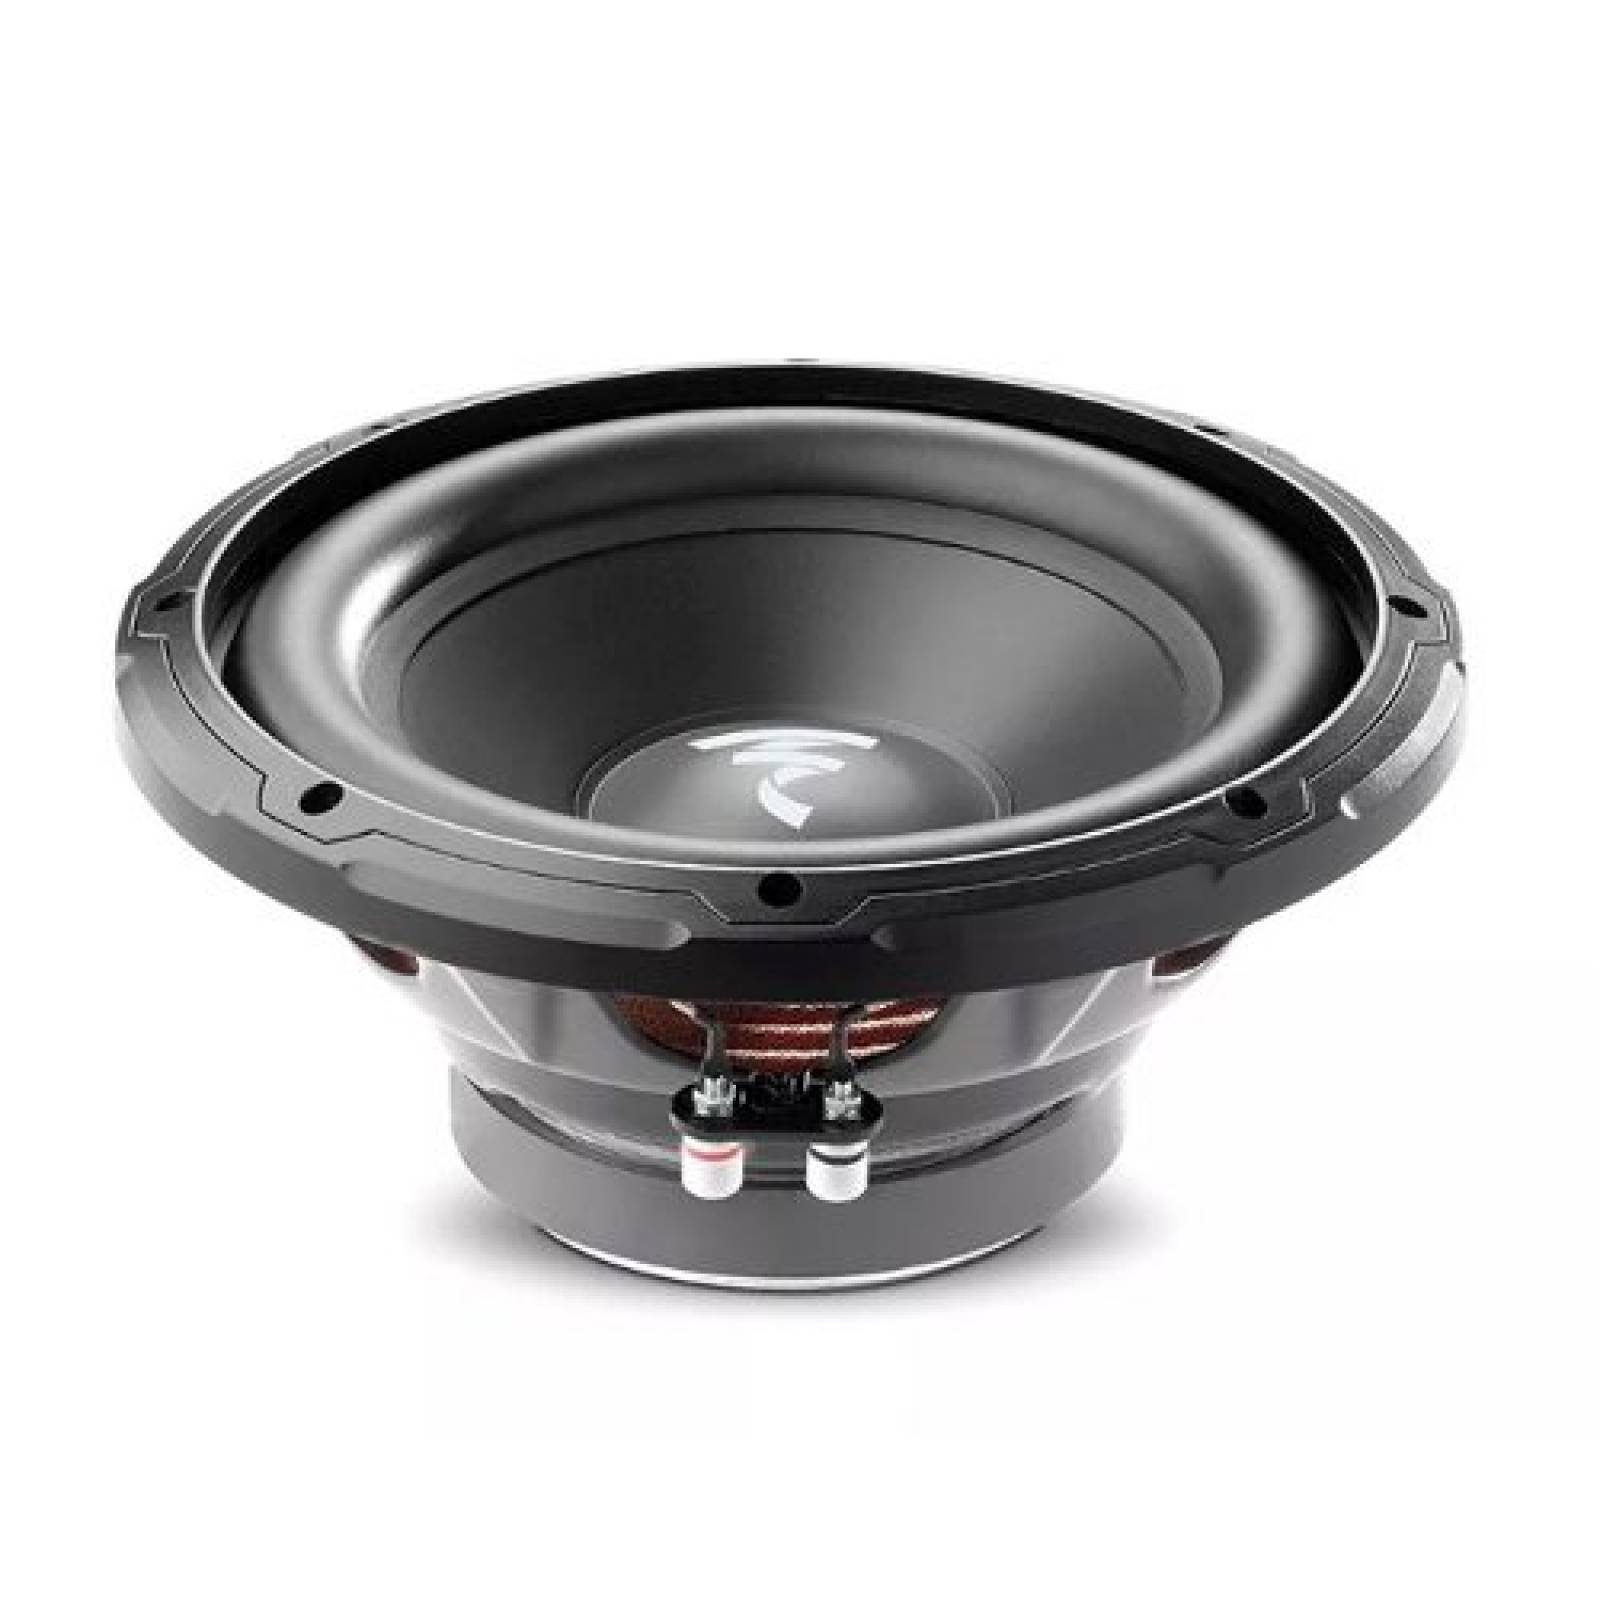 Subwoofer Auto Performance RSB-250 Focal